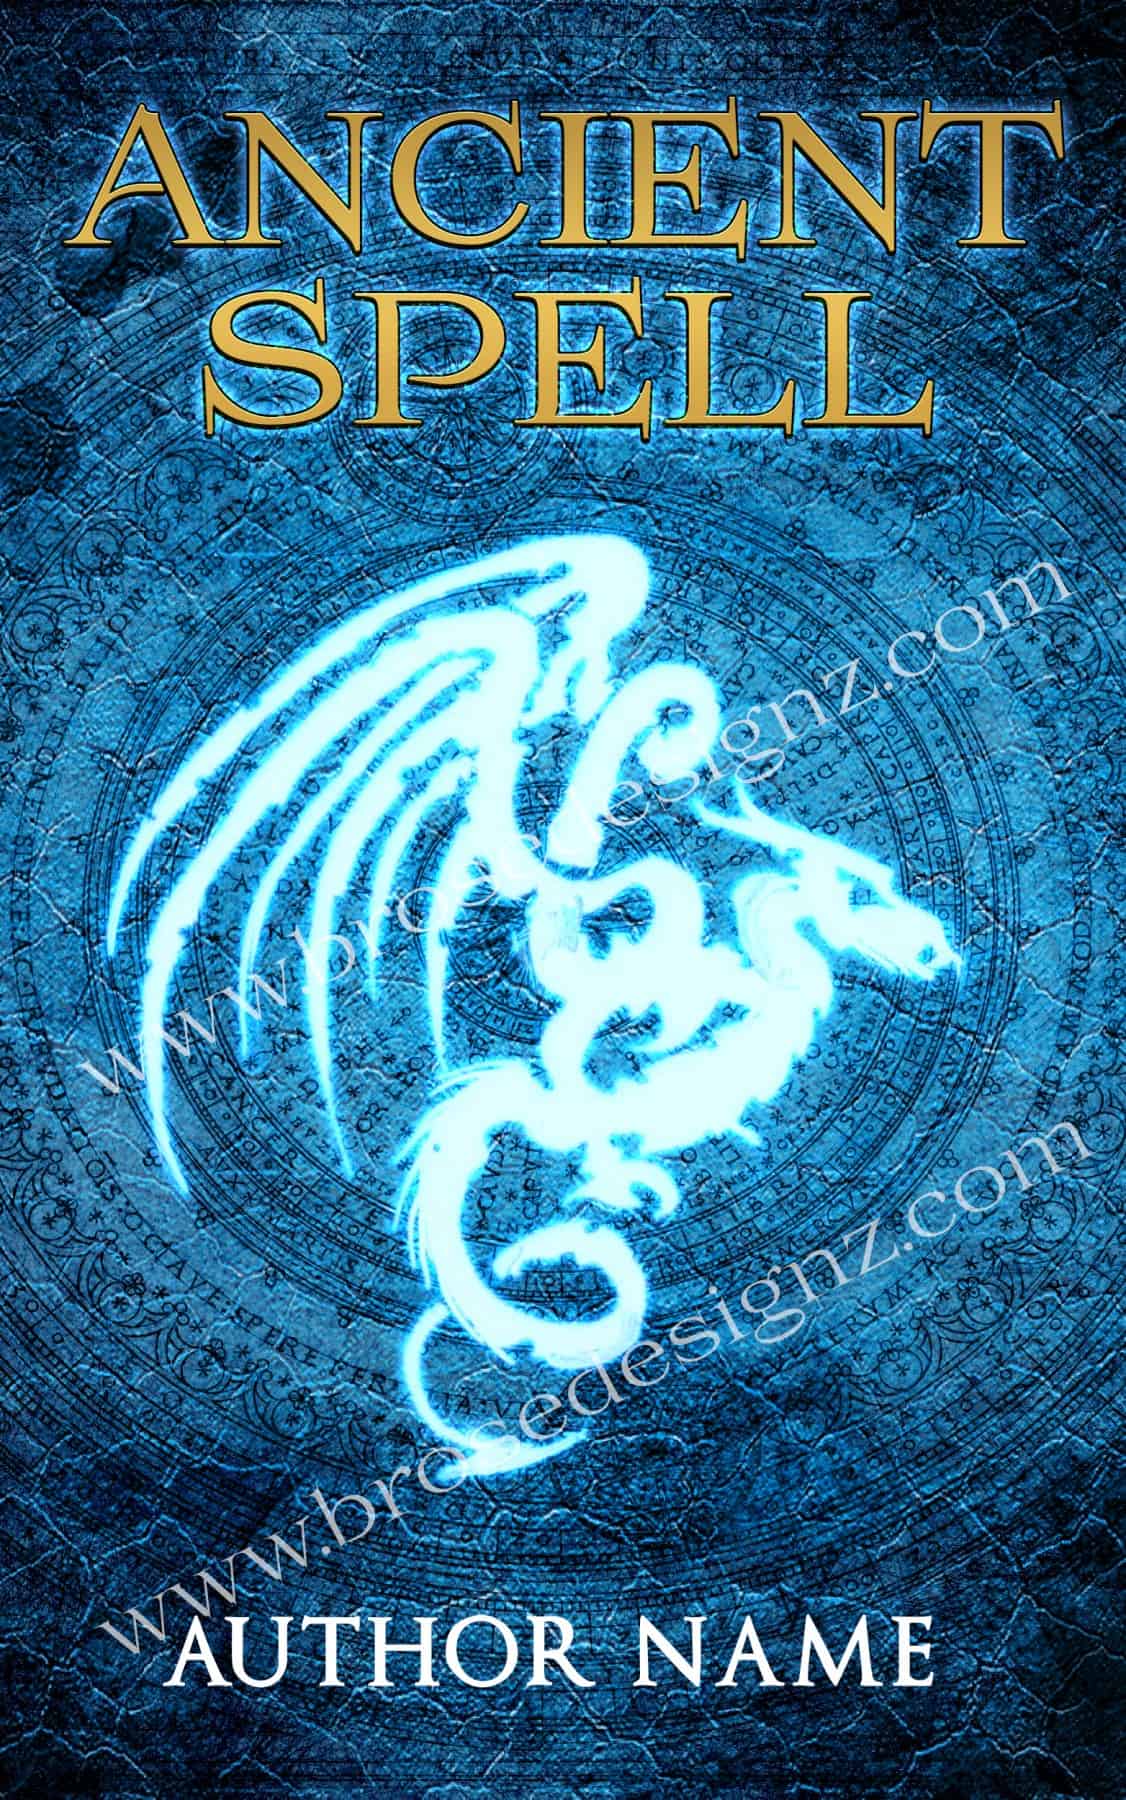 Ancient spell - The Book Cover Designer